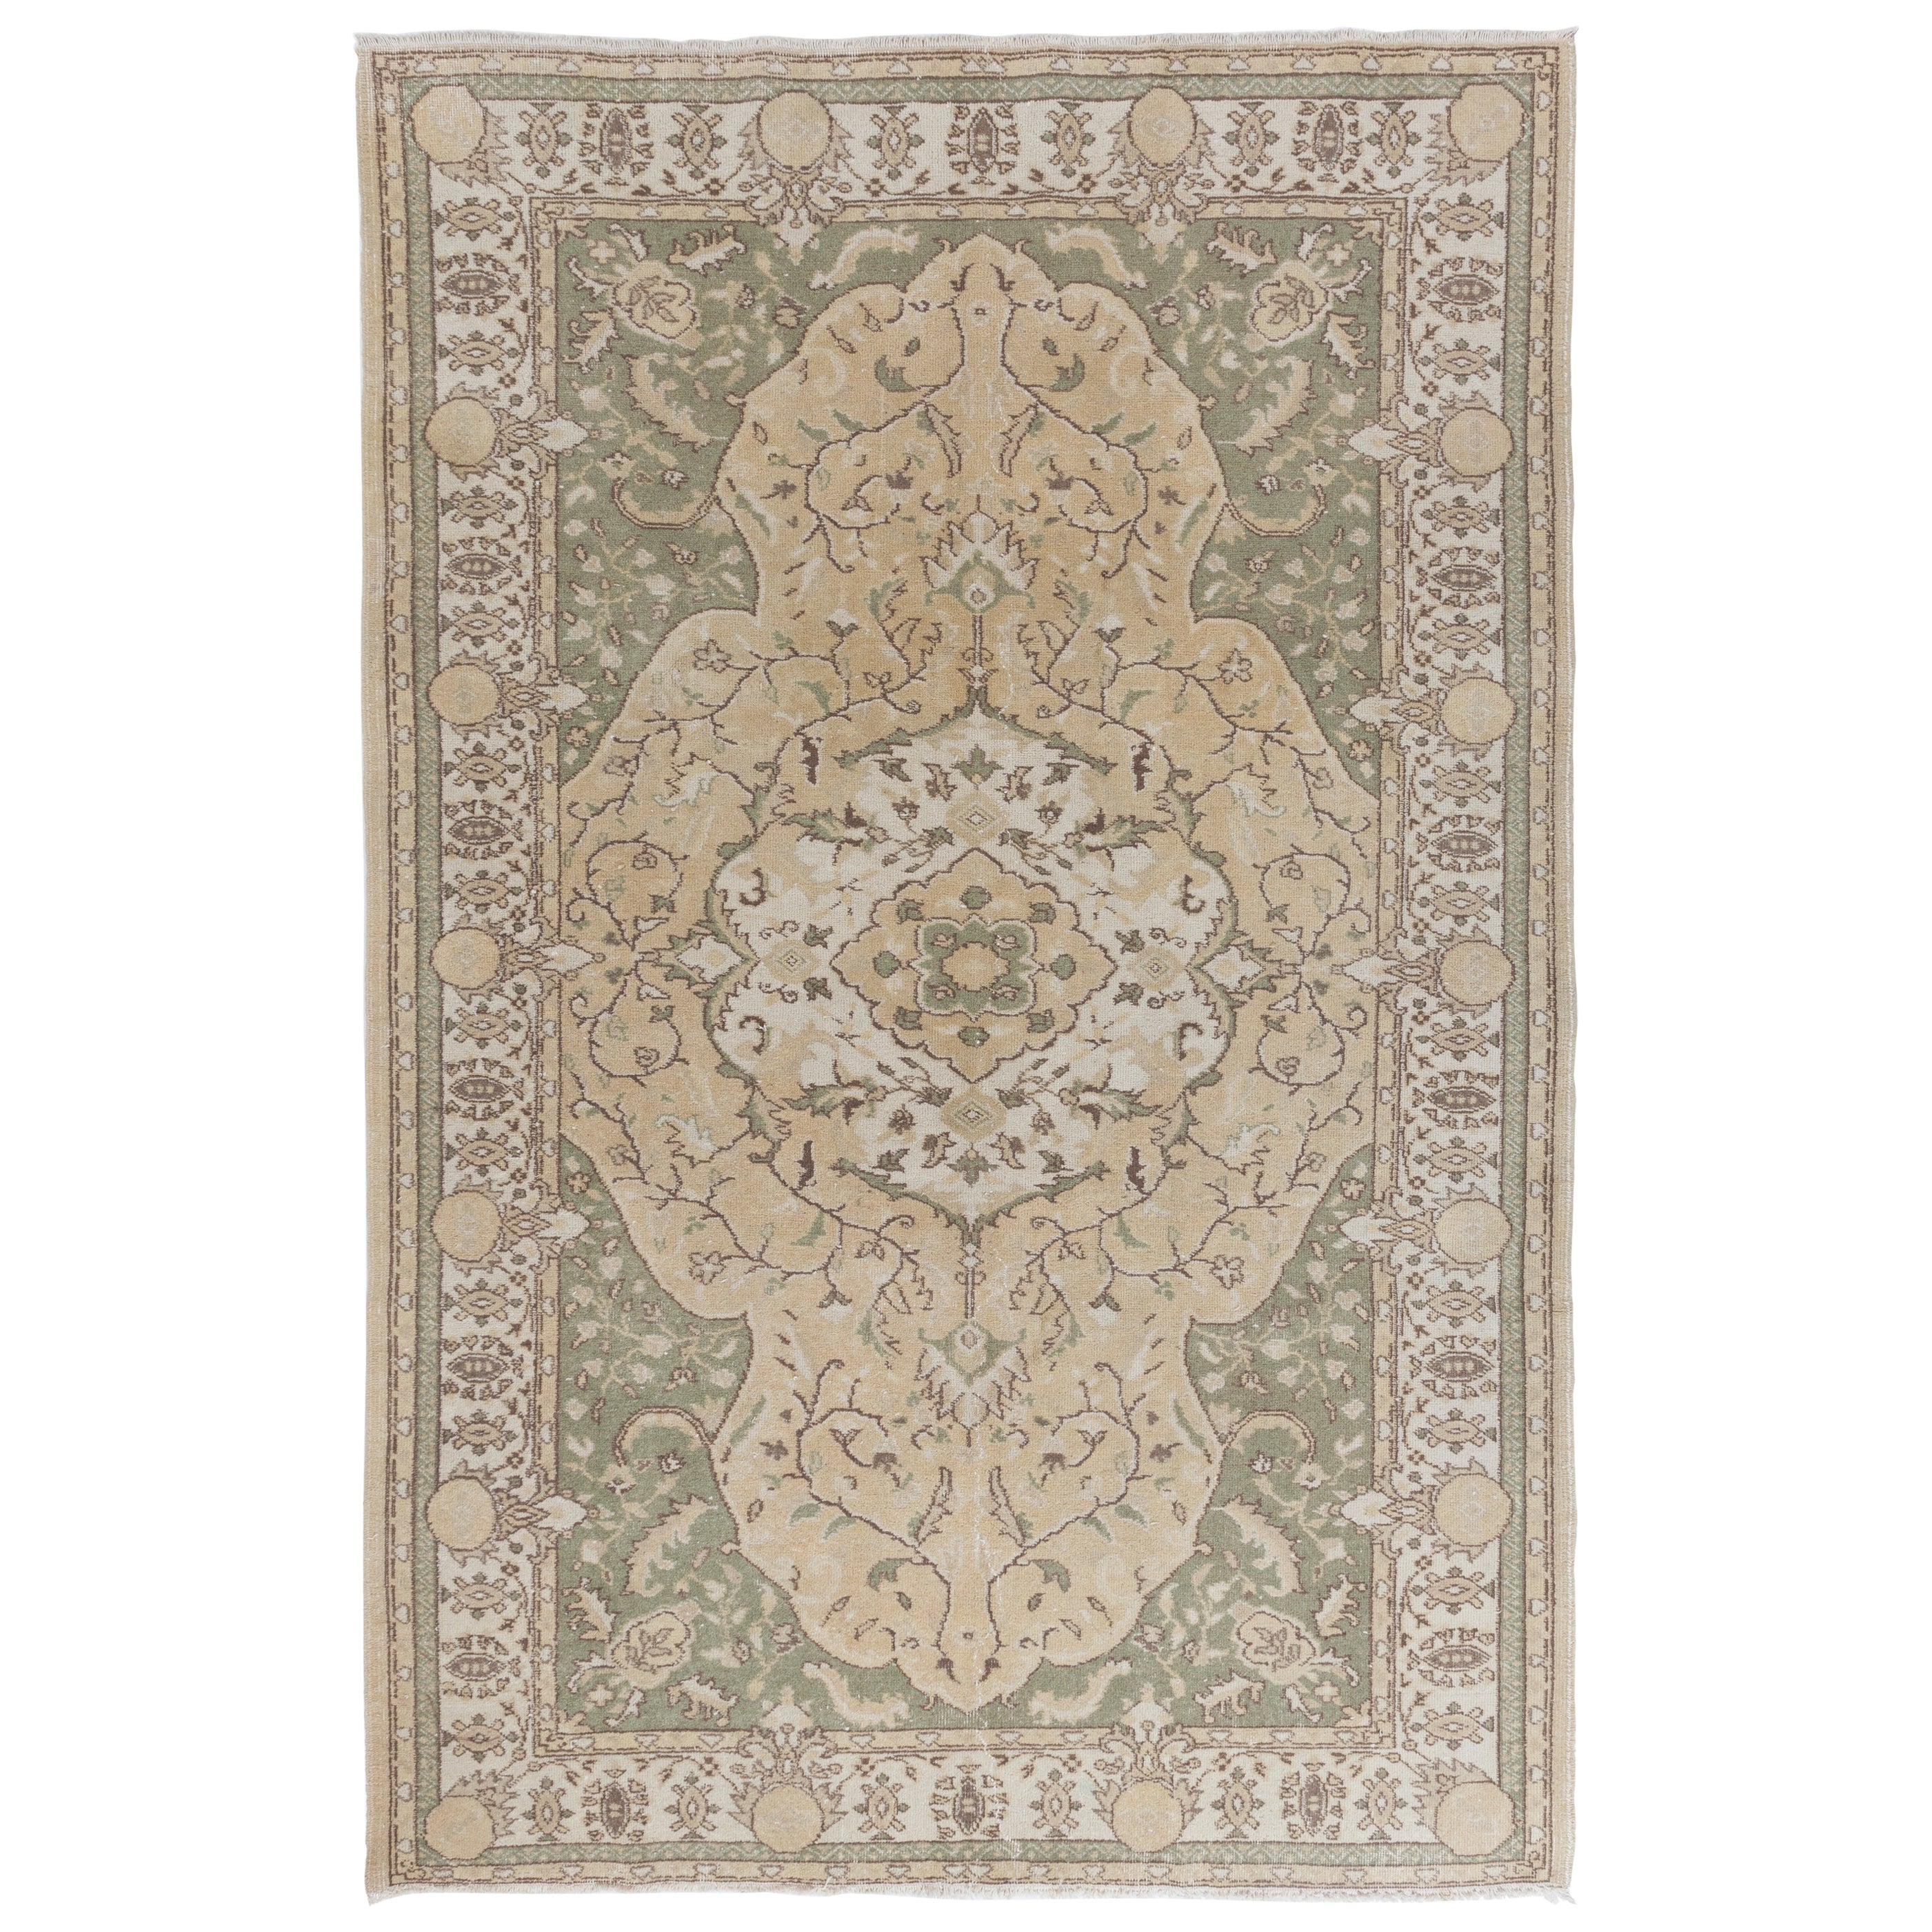 6.4x10 Ft Vintage Hand-Knotted Oushak Area Rug in Beige & Green For Sale